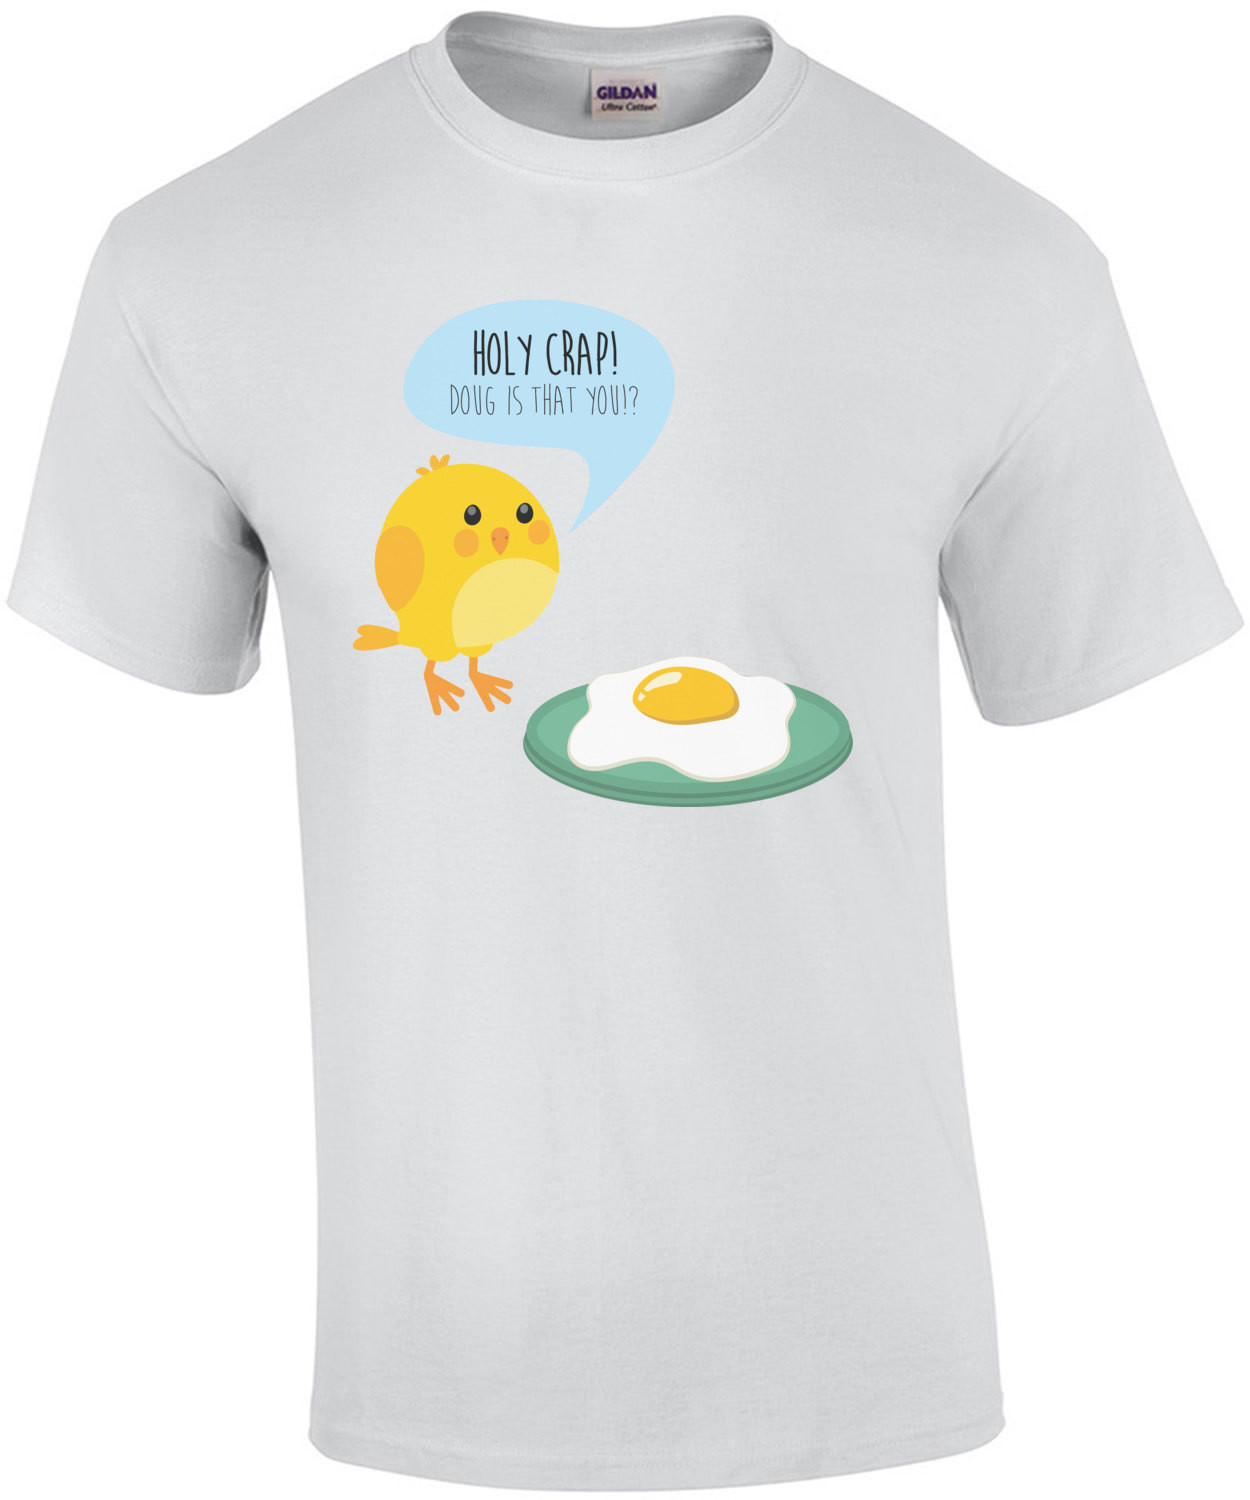 Holy crap Doug is that you? Funny chicken egg t-shirt